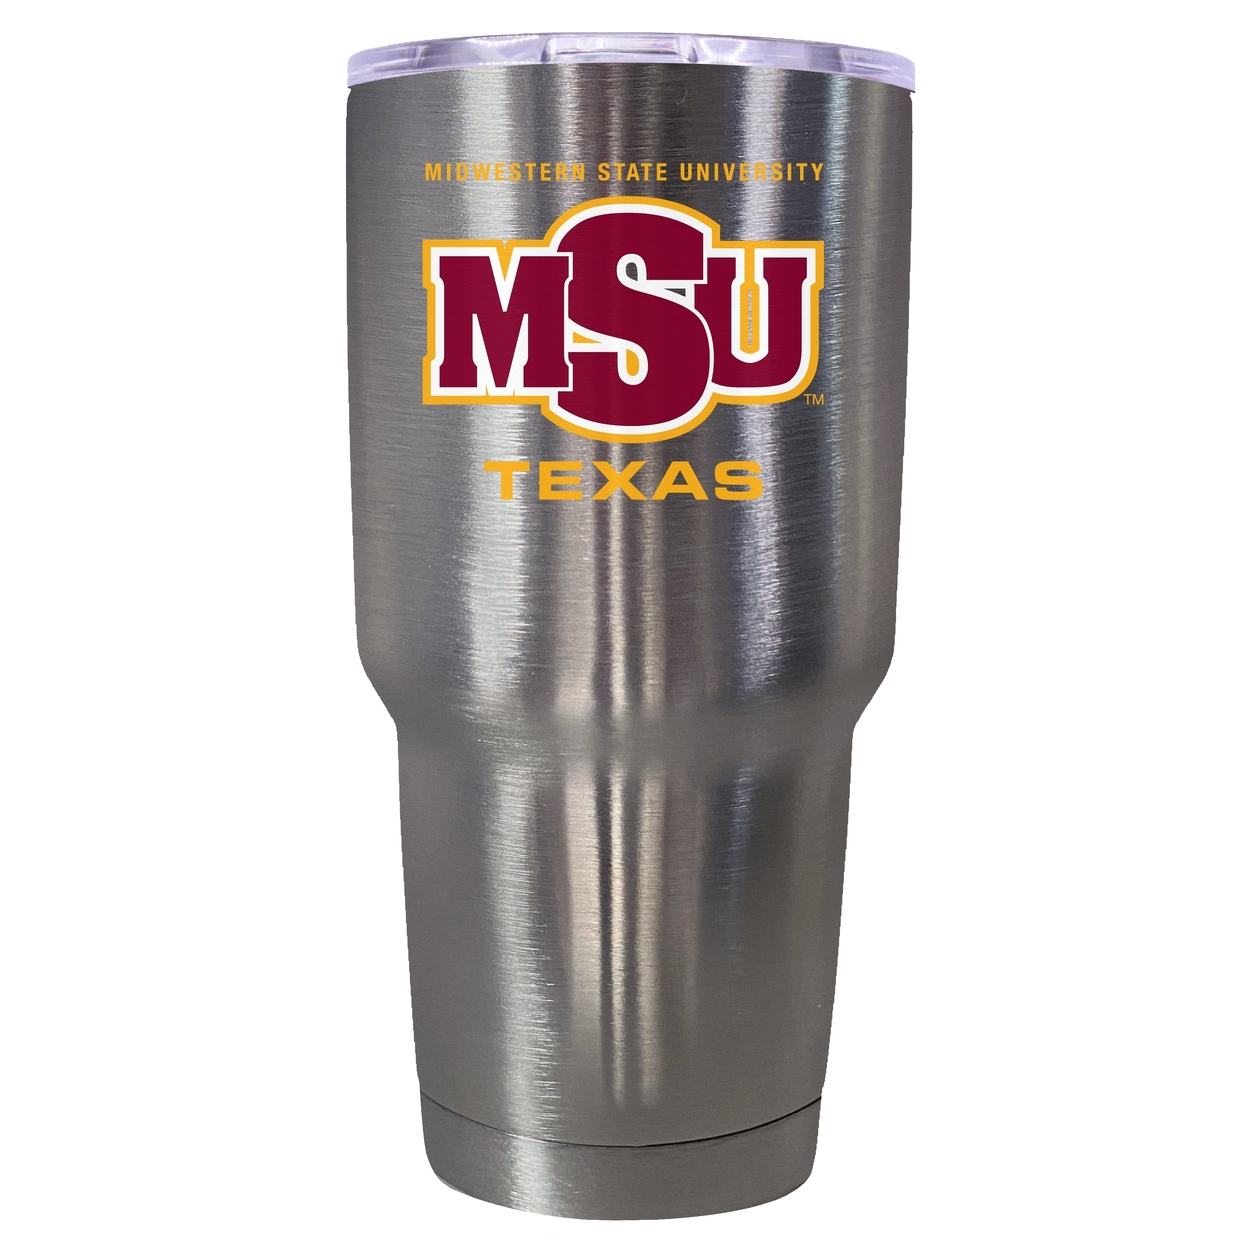 Midwestern State University Mustangs 24 Oz Insulated Stainless Steel Tumbler